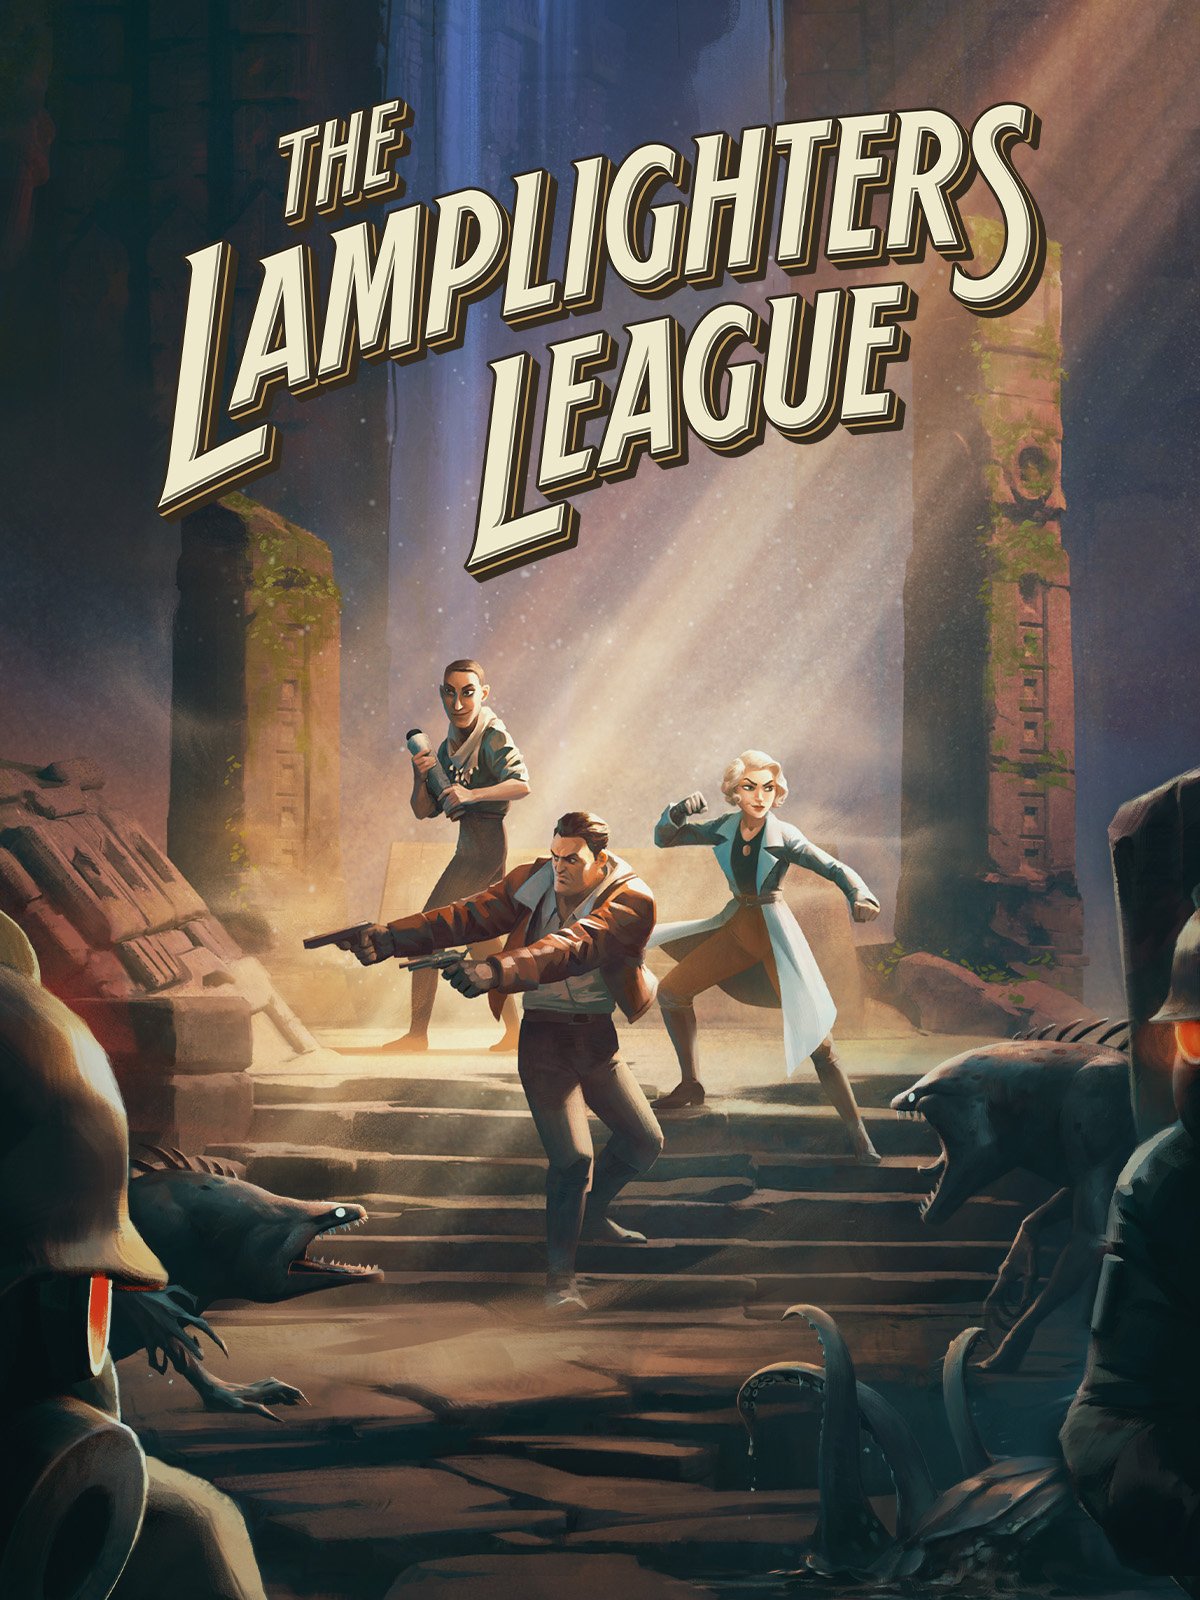 download the last version for apple The Lamplighters League